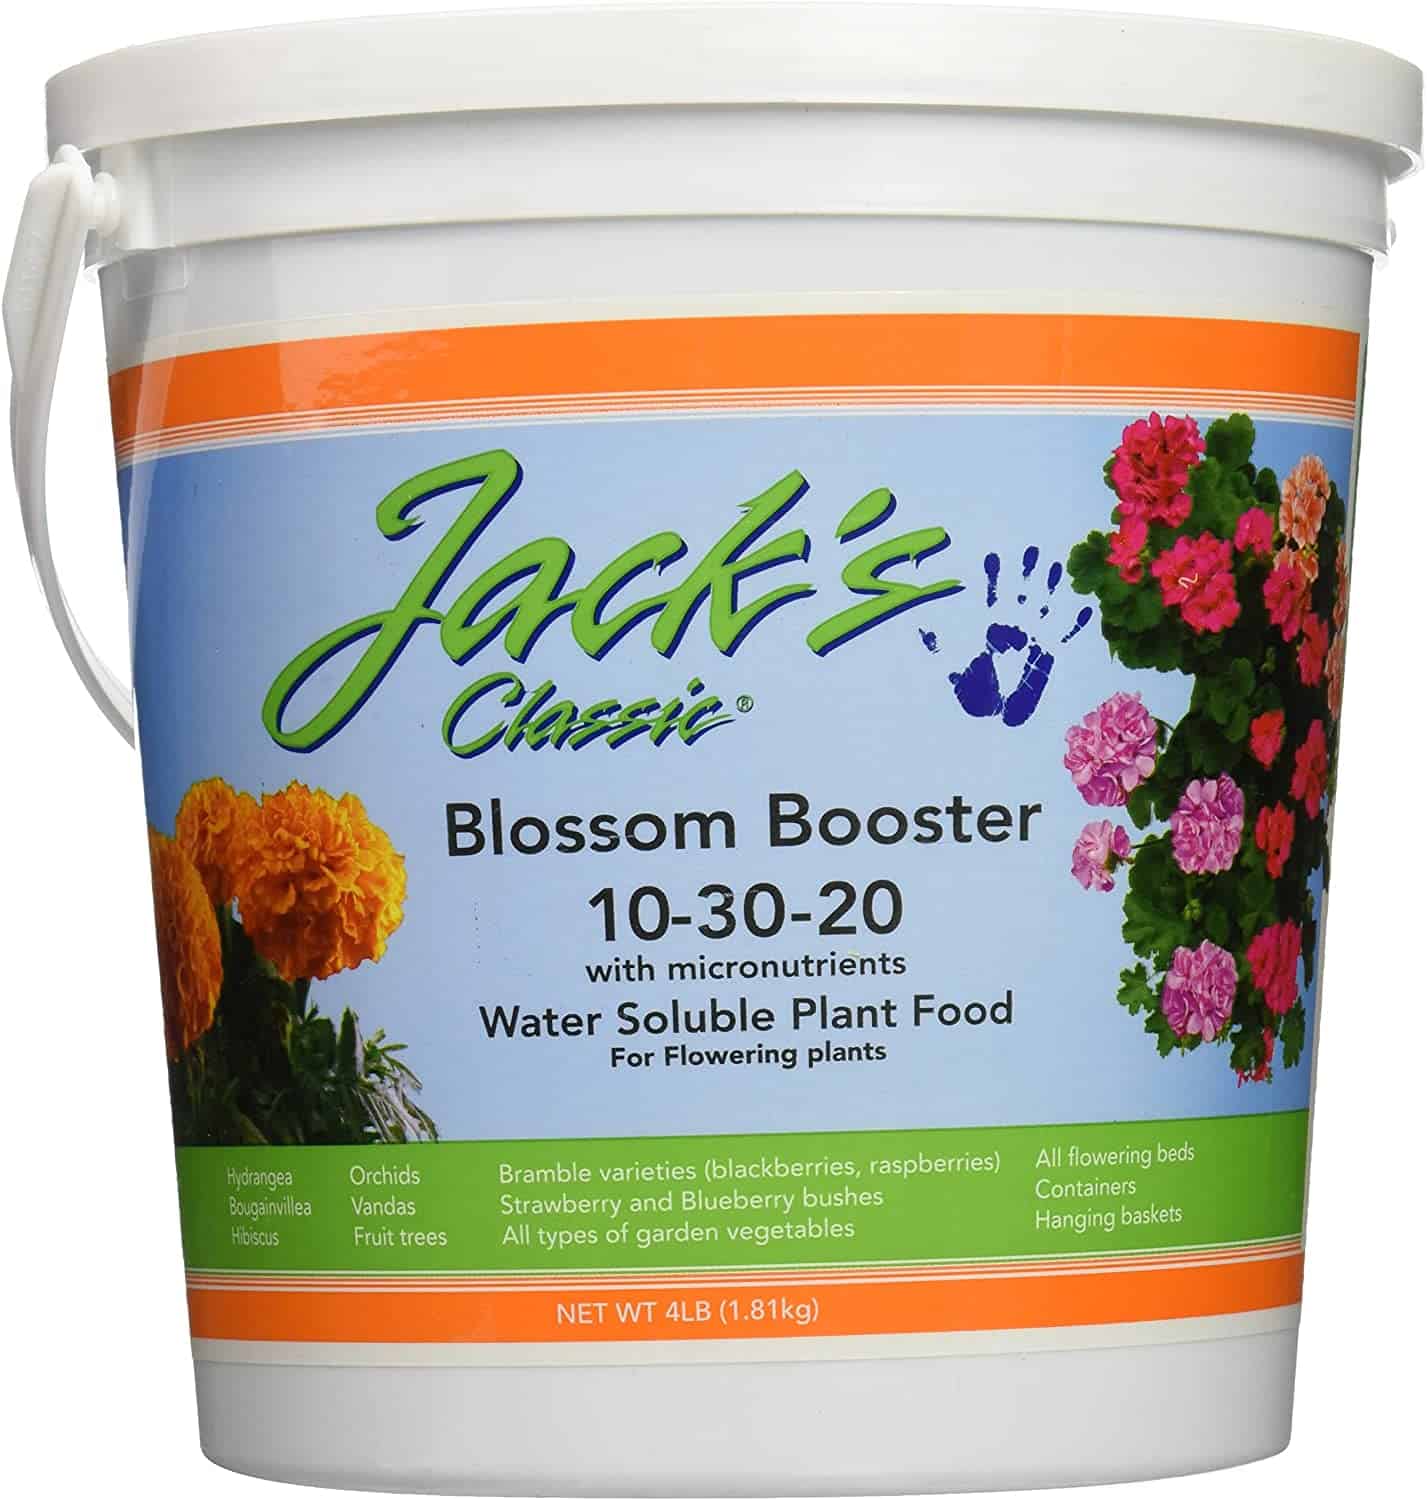 Jack's Classic Blossom Booster is how to fertilize clematis and other flowering plants